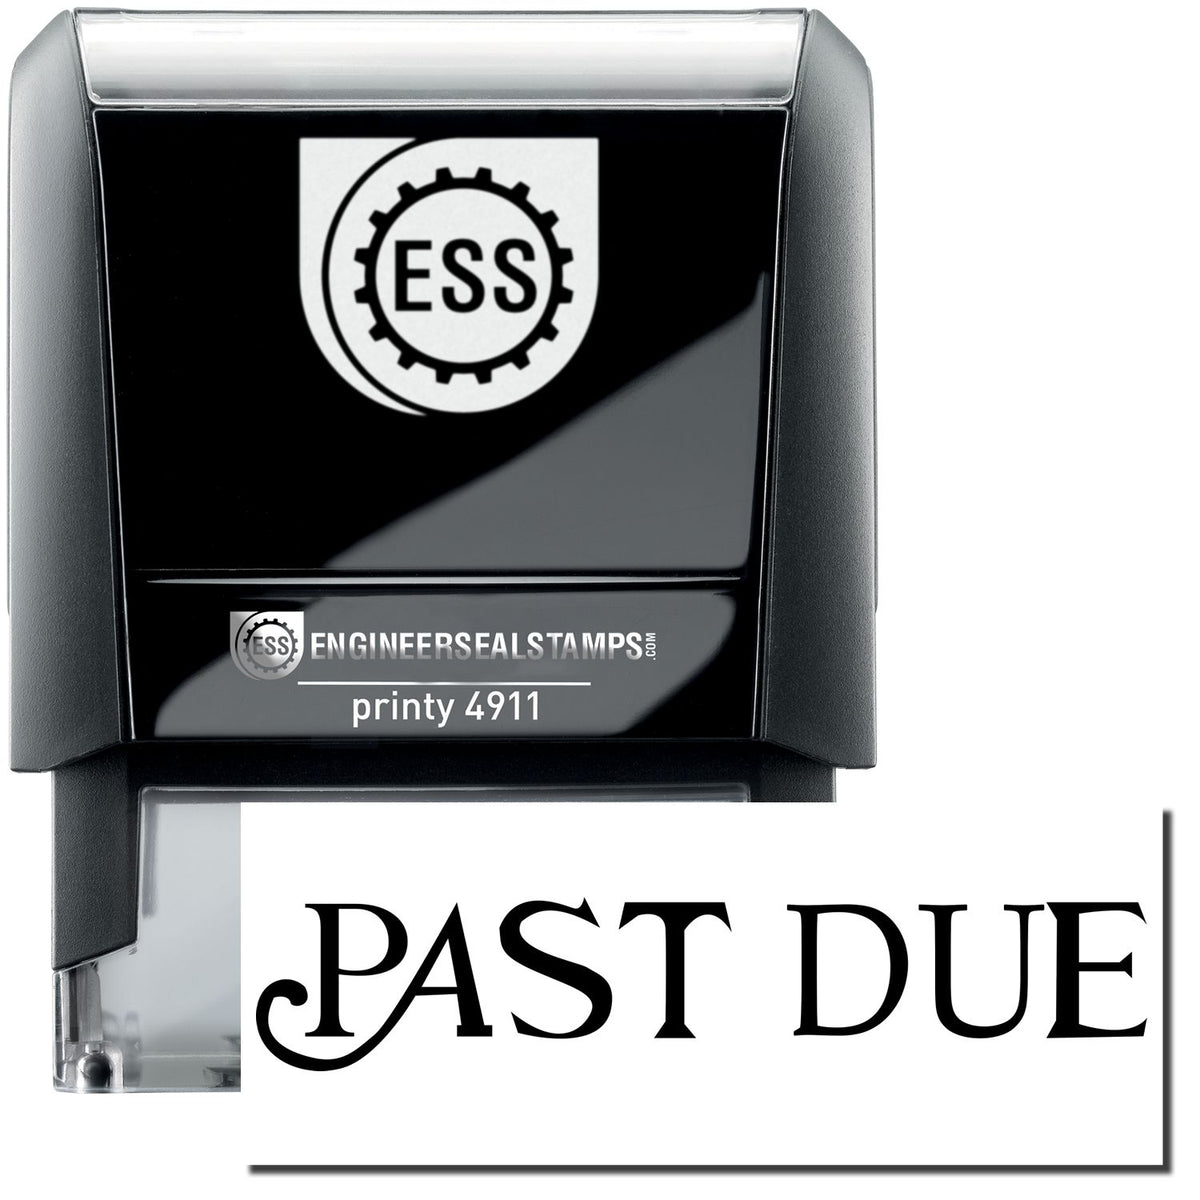 A self-inking stamp with a stamped image showing how the text &quot;PAST DUE&quot; in a curley font is displayed after stamping.